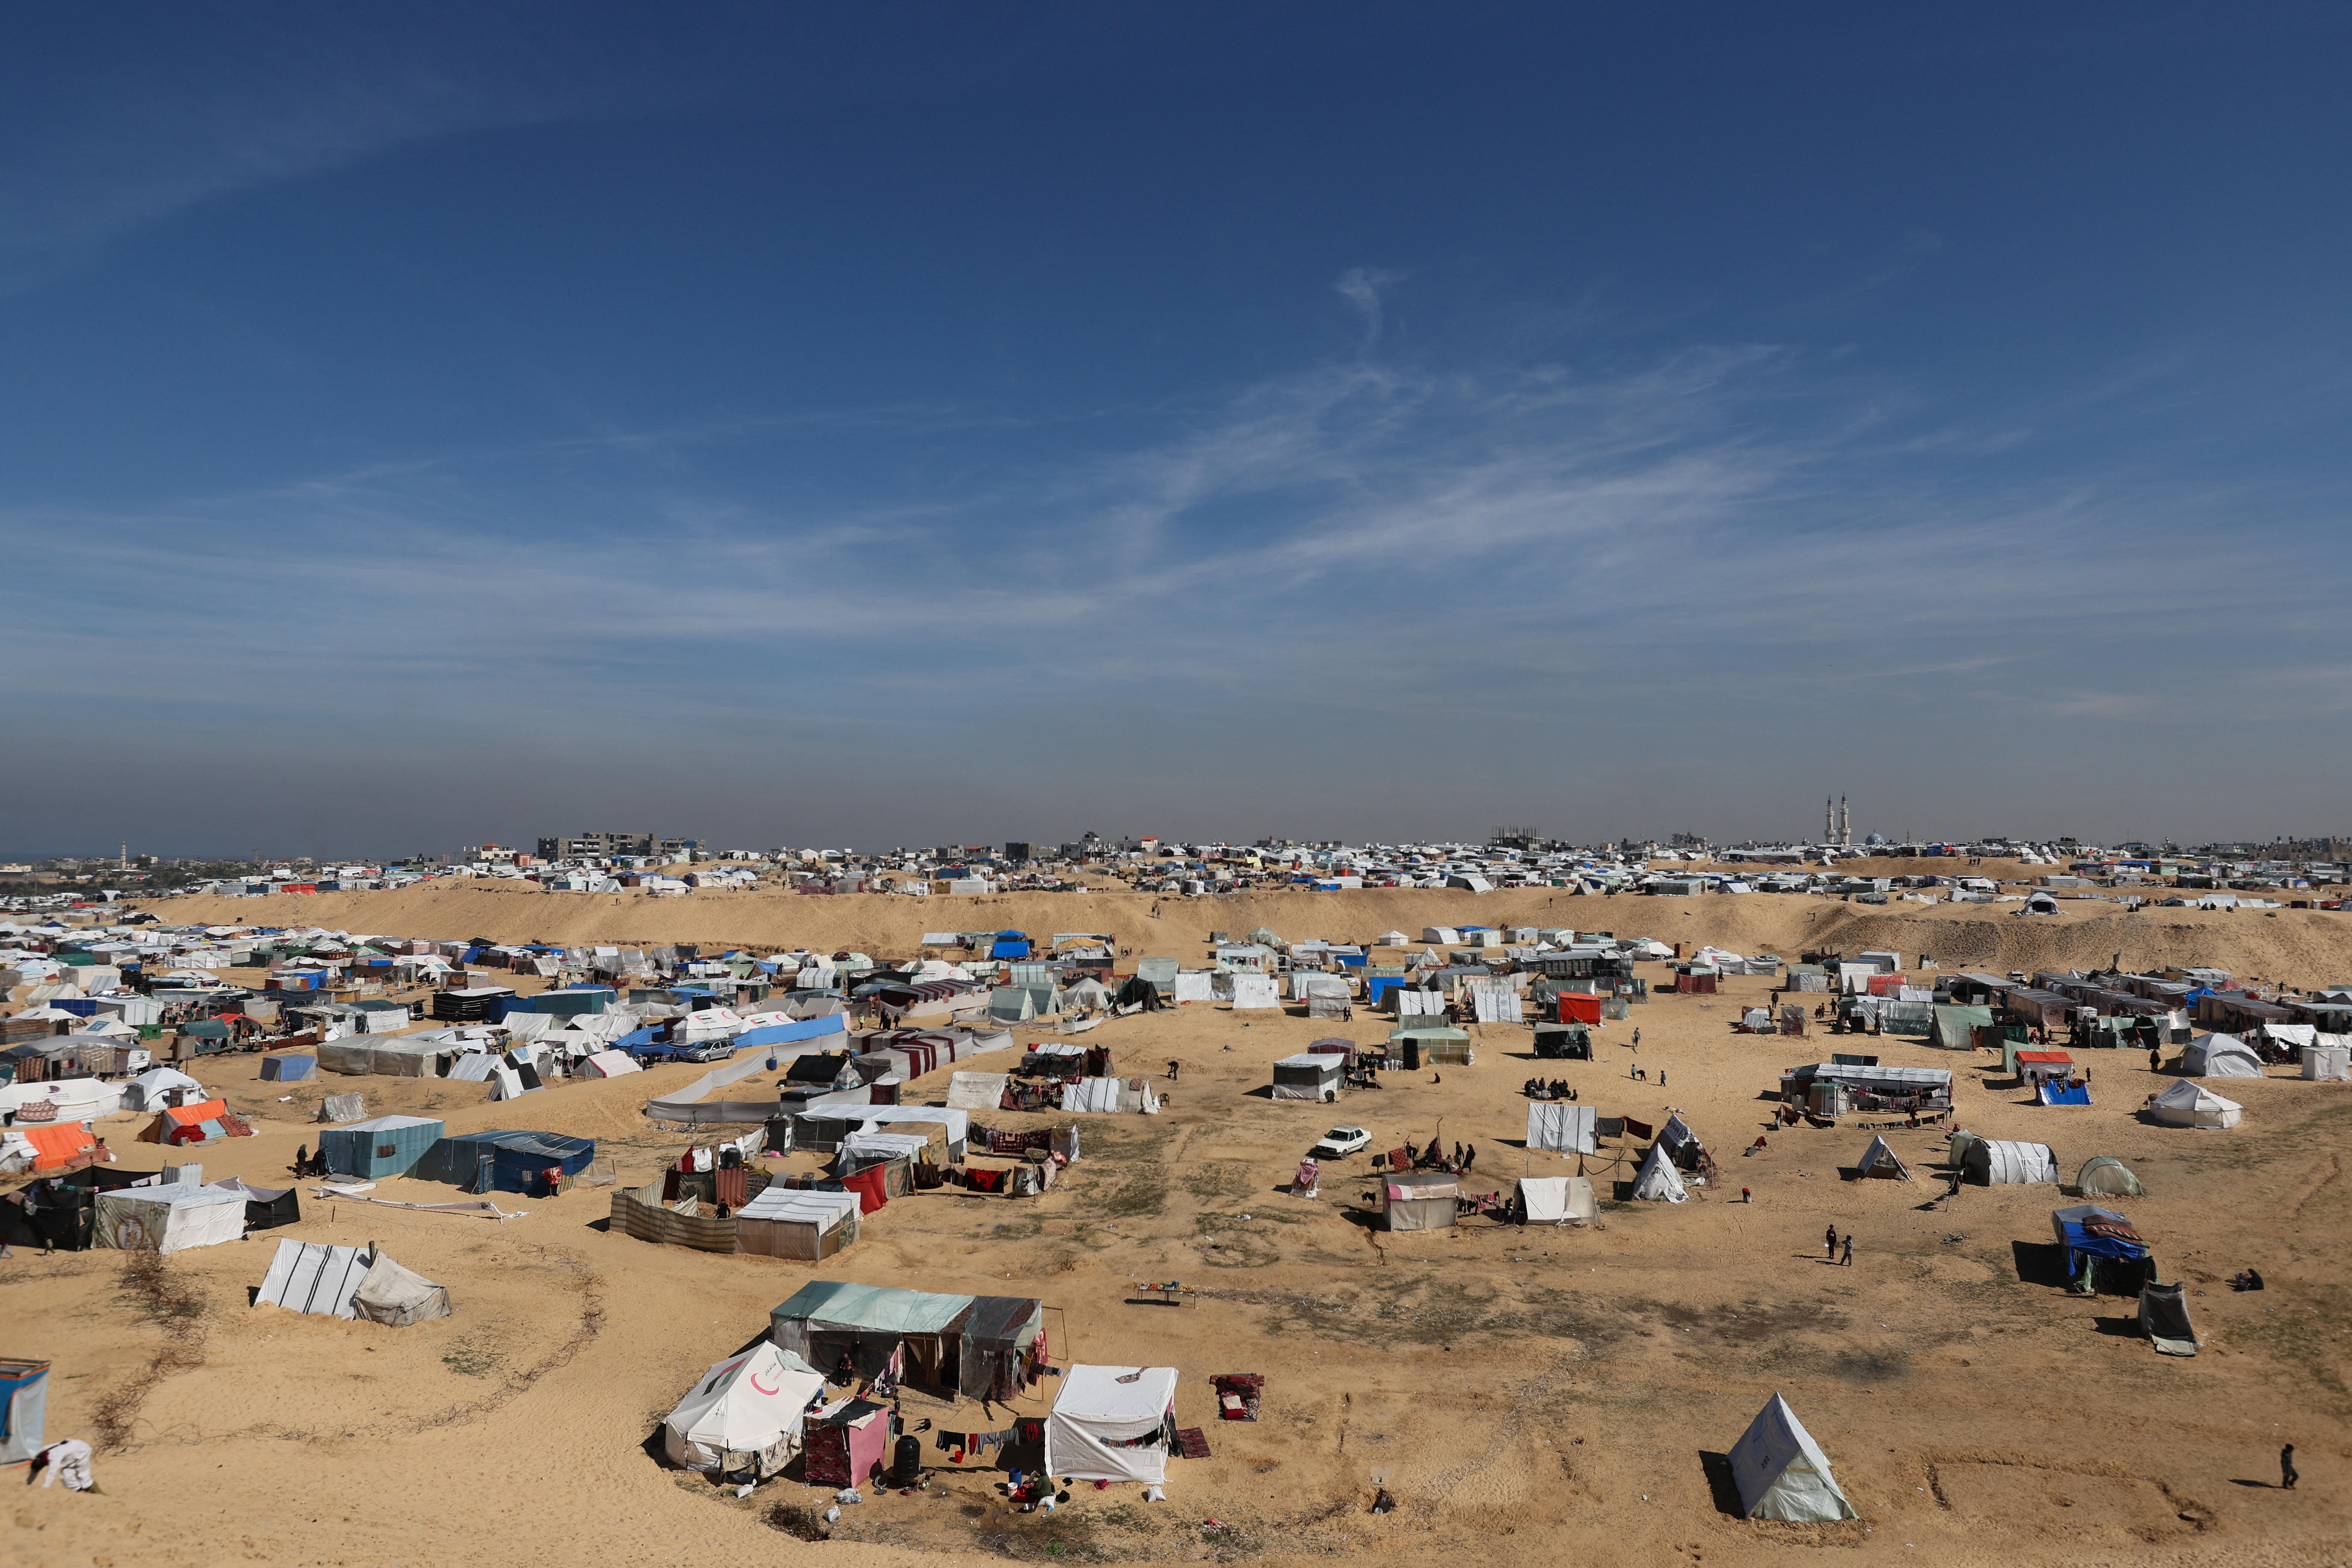 Displaced Palestinians, who fled their houses due to Israeli strikes, take shelter in a tent camp in Rafah, Gaza, near the border with Egypt on February 8.